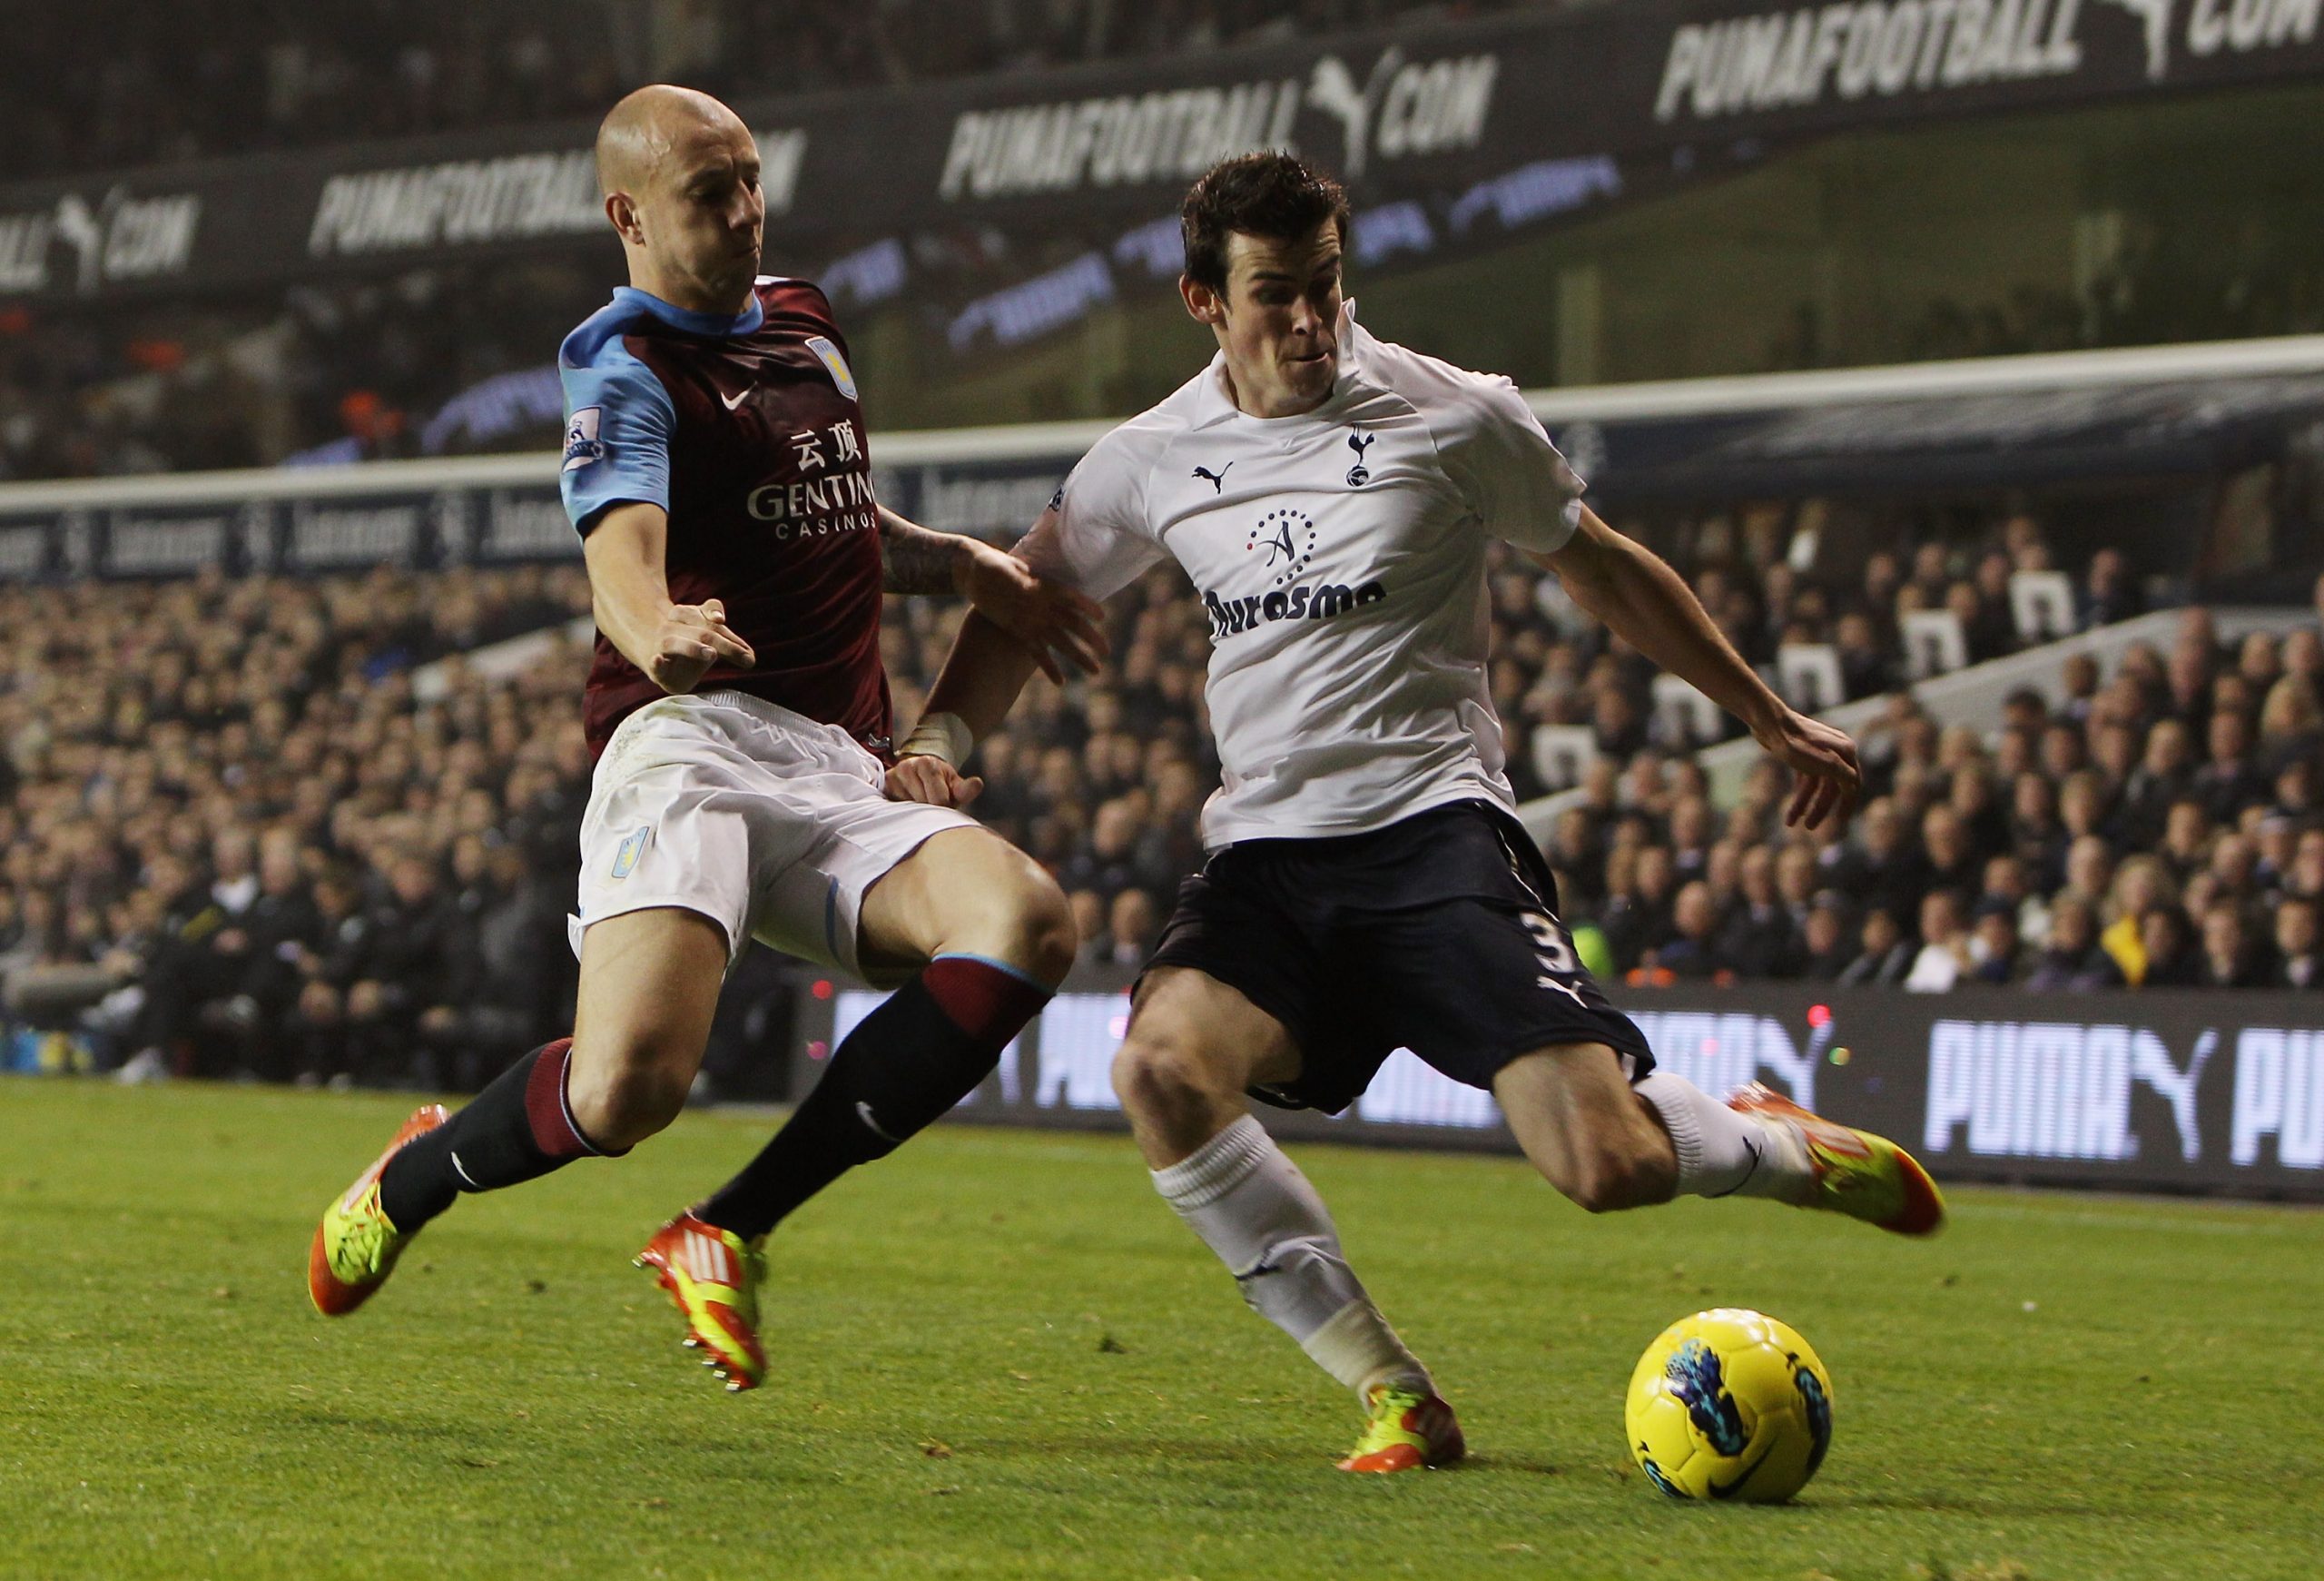 Alan Hutton of Aston Villa goes in for the tackle on Gareth Bale of Spurs